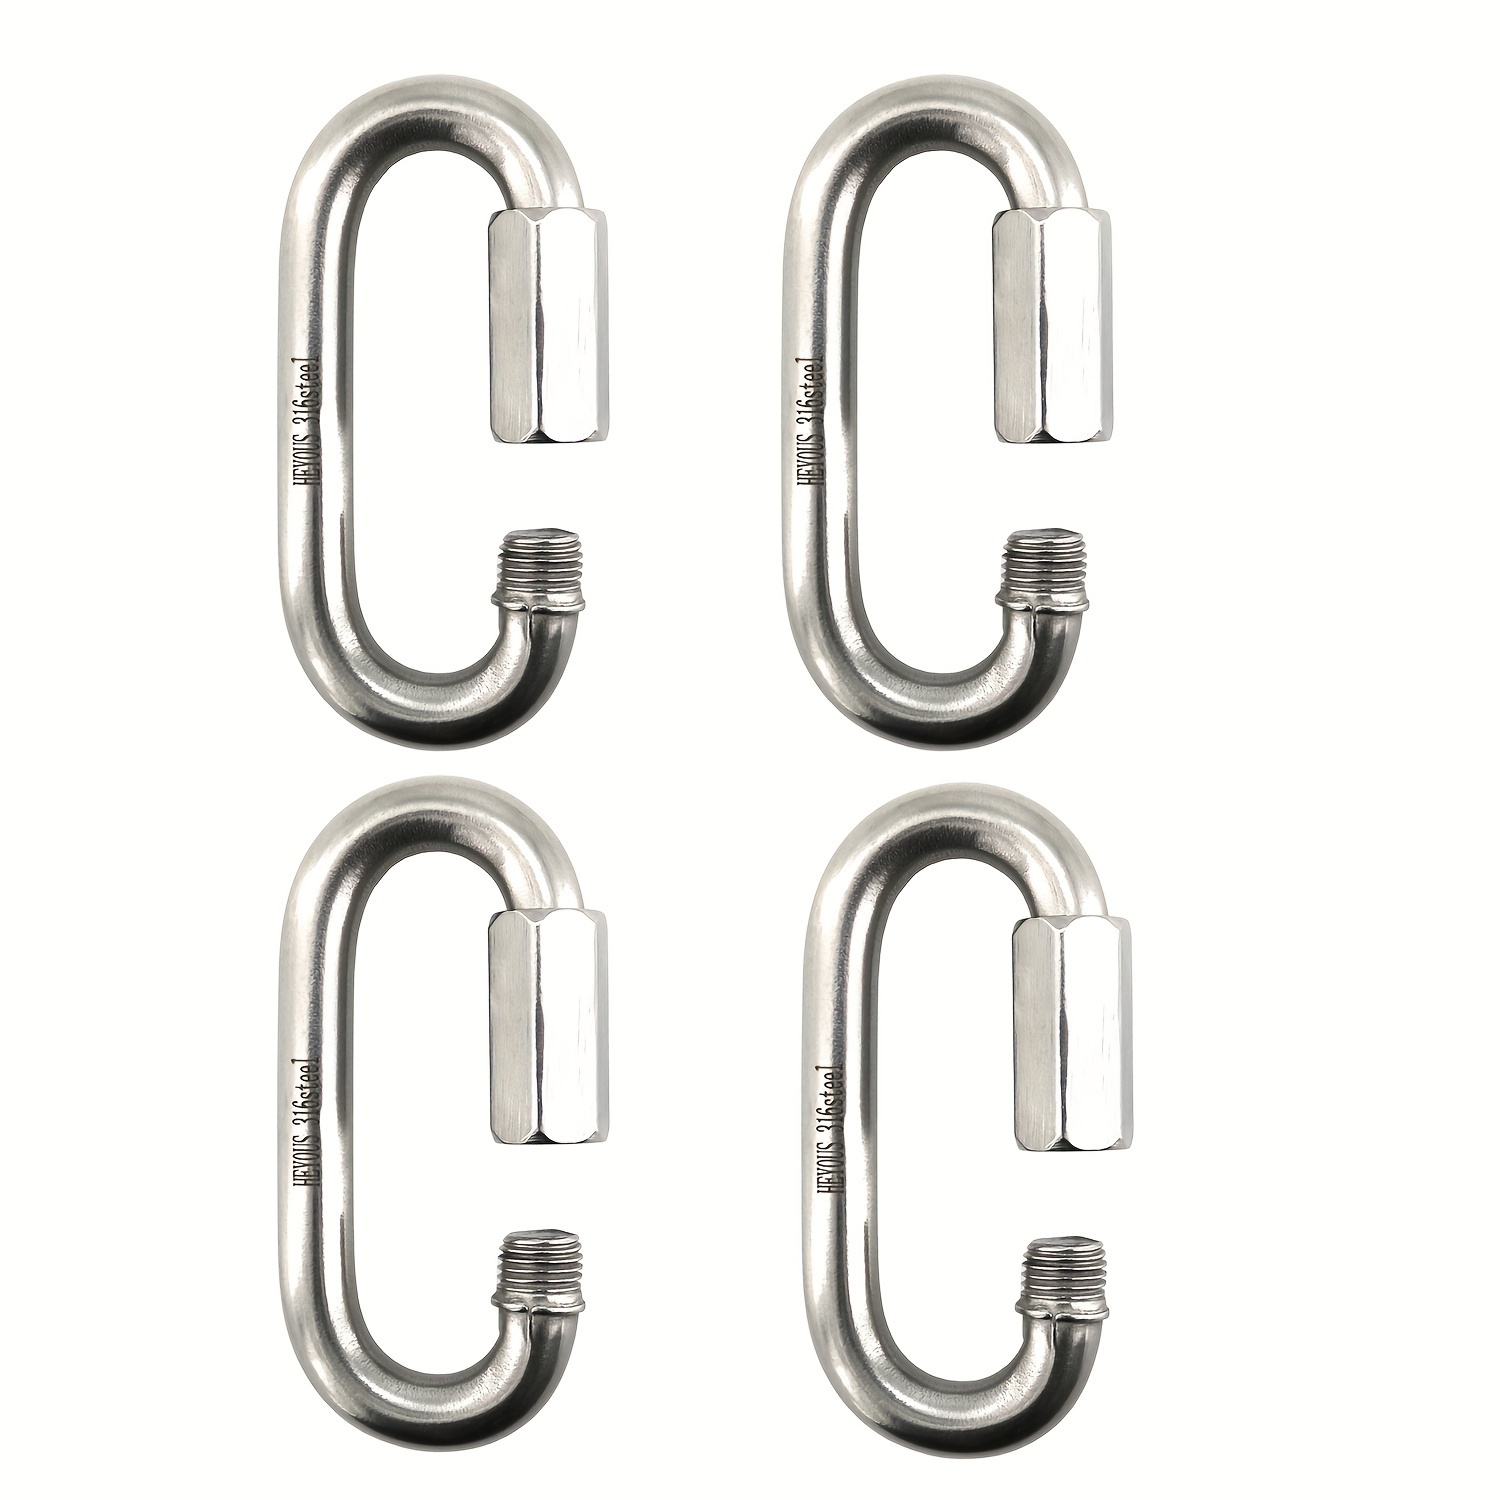 

4pcs M8 Chain Connector 5/16 Inch Stainless Steel 316 Quick Links, D Shape Locking Quick Connector - 1520lb Capacity